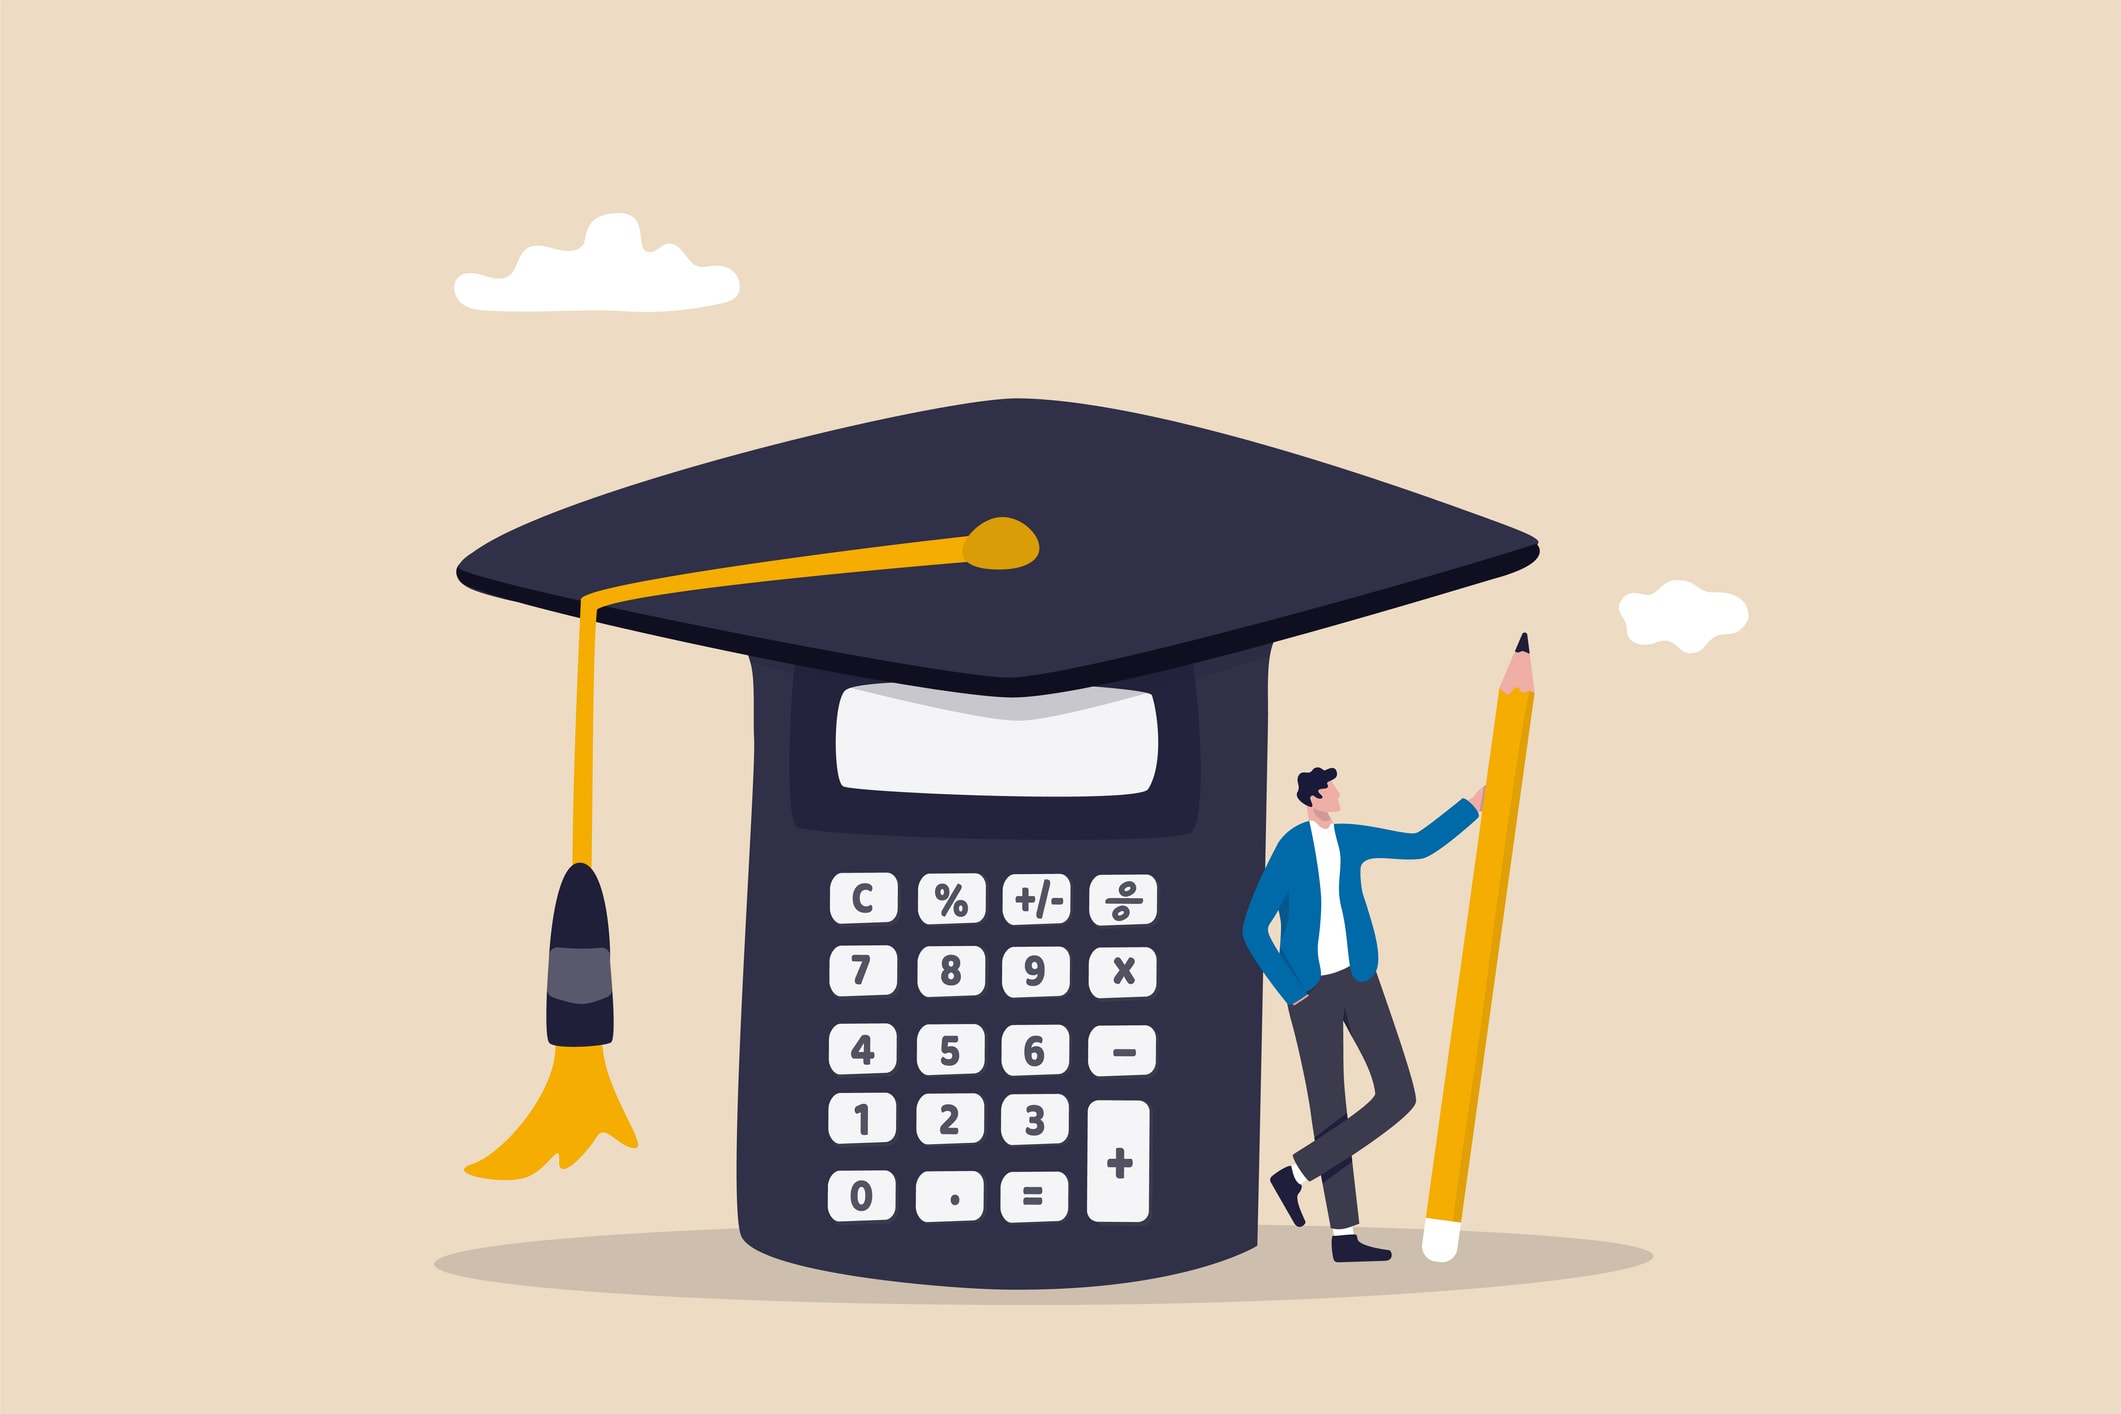 Student loan calculation, education budget allocation, university expense and debt pay off or scholarship payment concept, graduated student standing with mortar board hat calculator.